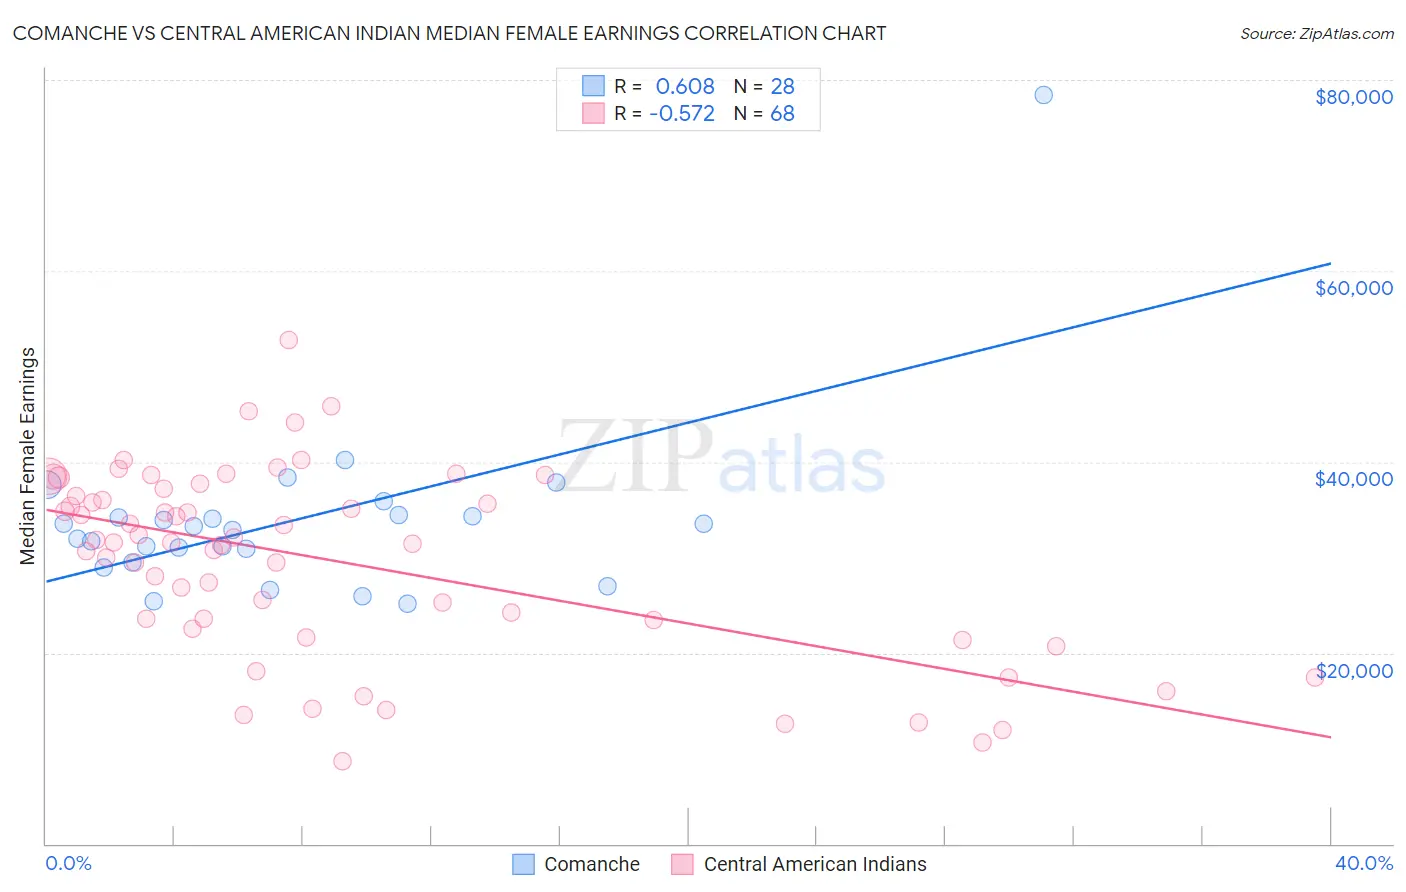 Comanche vs Central American Indian Median Female Earnings